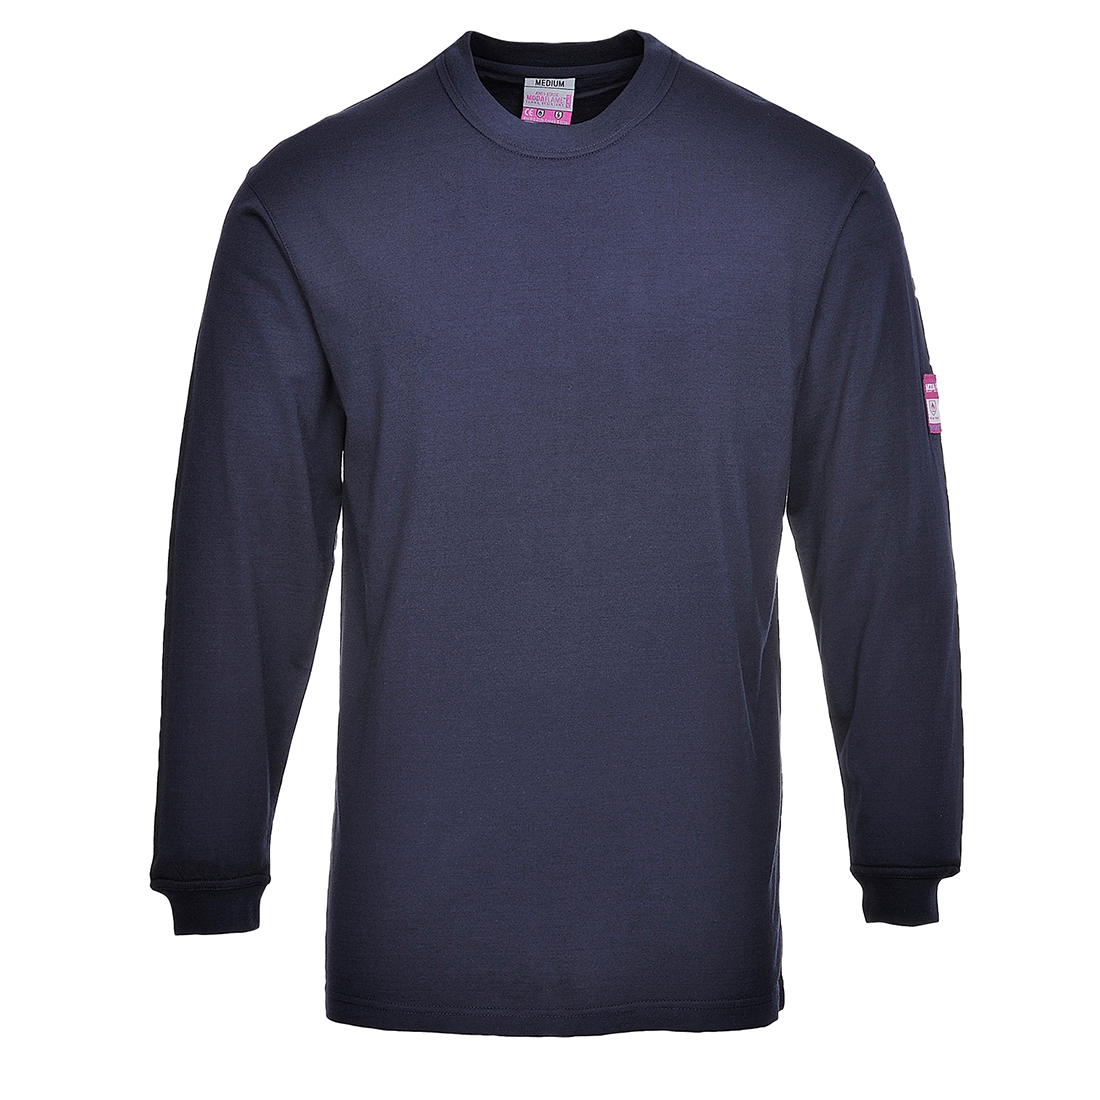 Flame Resistant Anti-Static Comfrtable Soft Long Sleeve T-Shirt